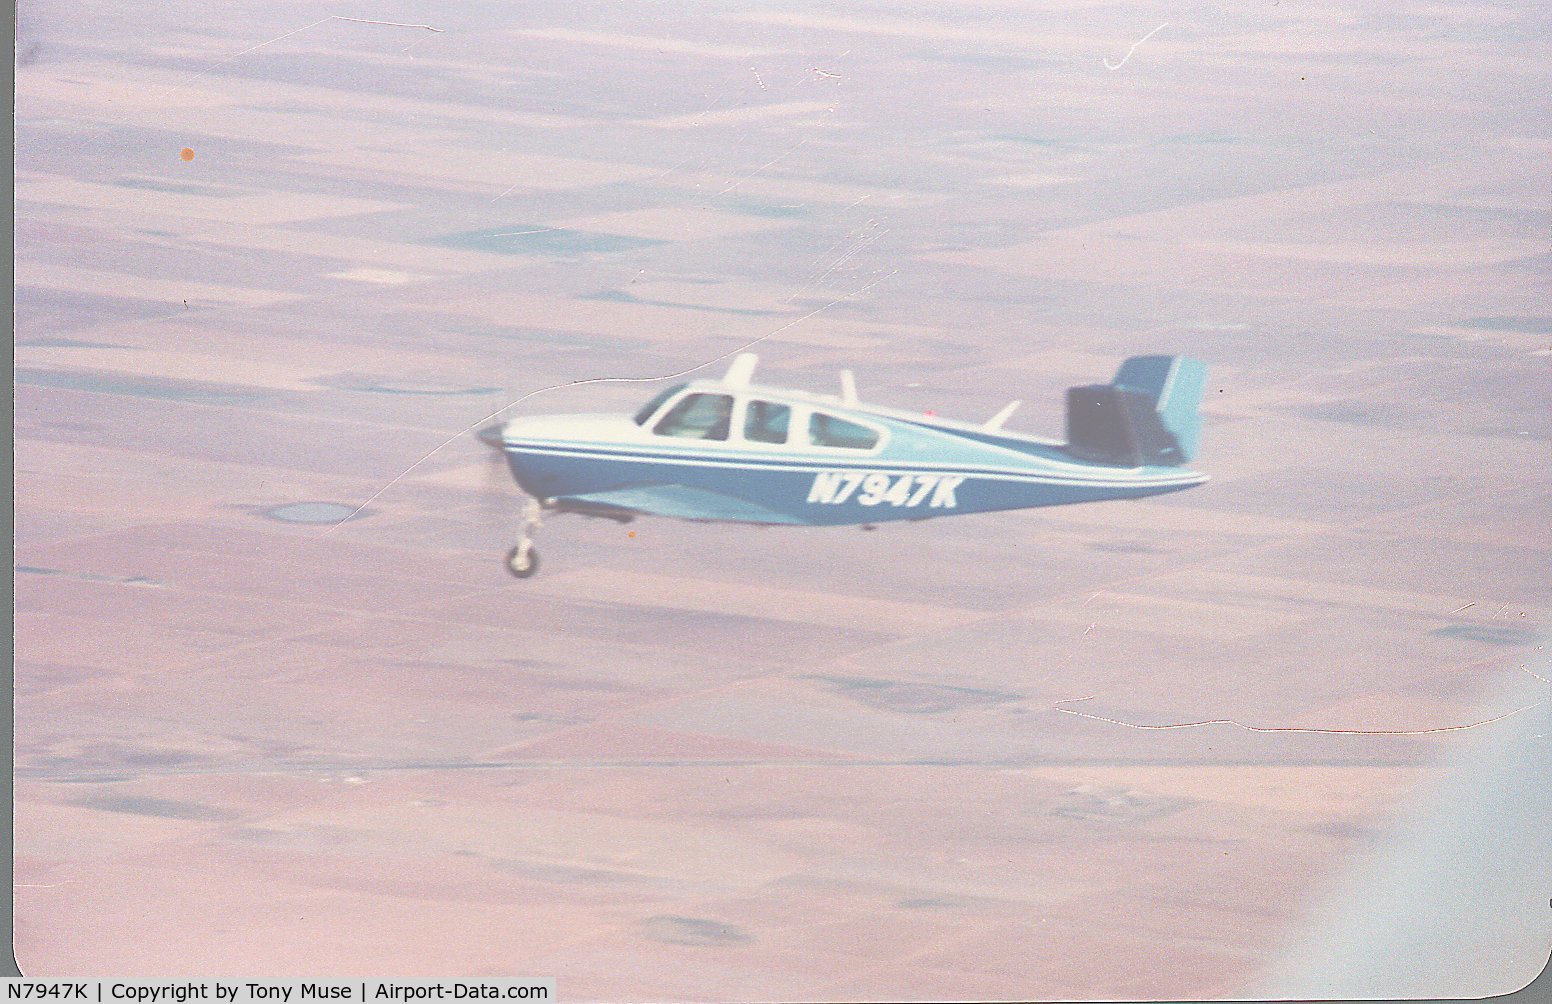 N7947K, 1964 Beech S35 Bonanza C/N D-7457, My father owned this aircraft back in the 80's